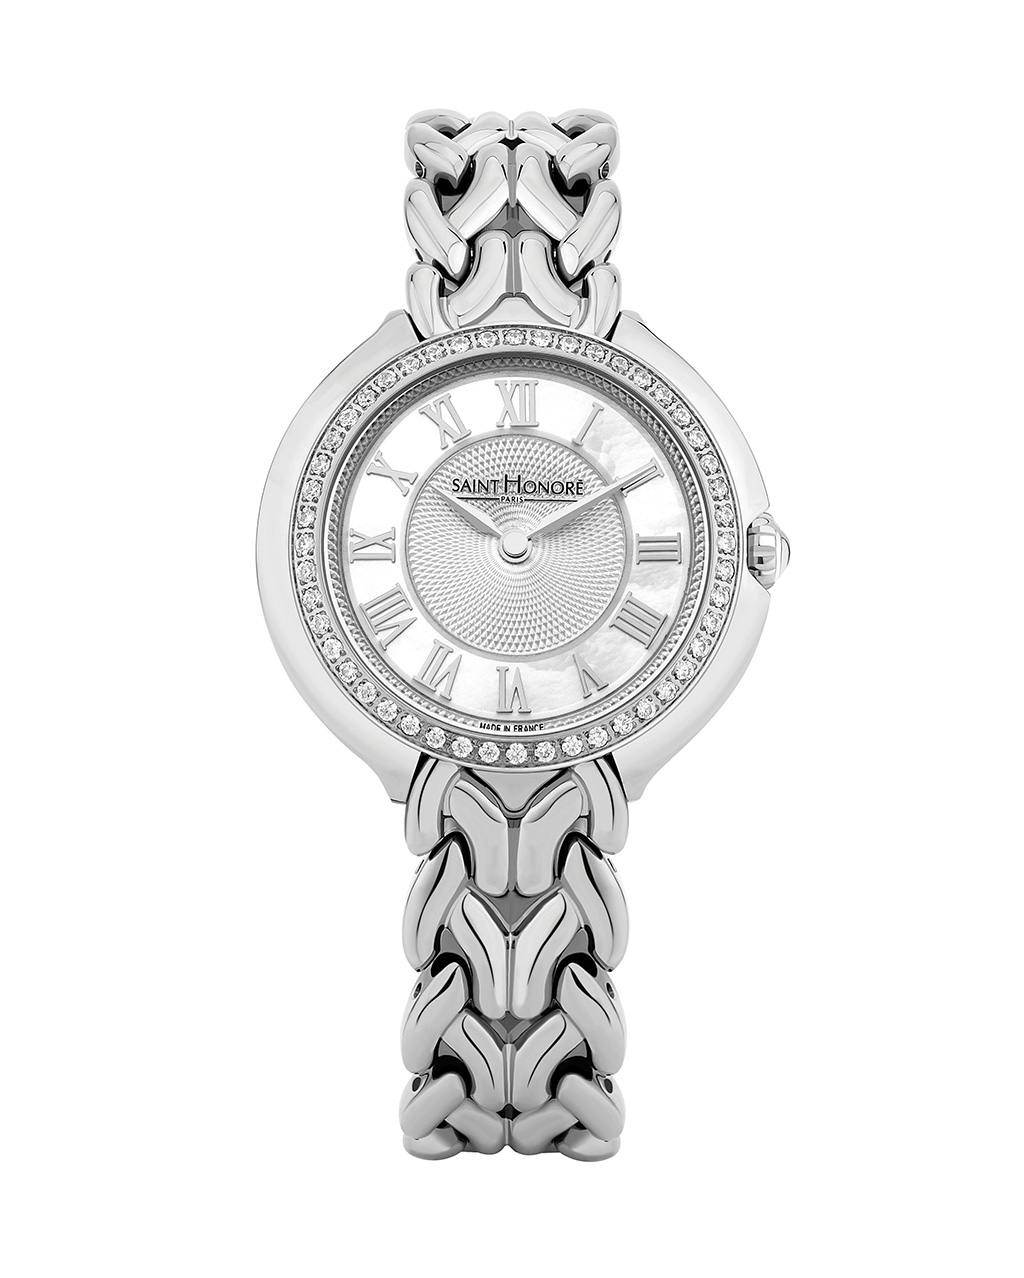 DIVINE Women's watch - stainless steel, white & diamond dial, stainless steel strap